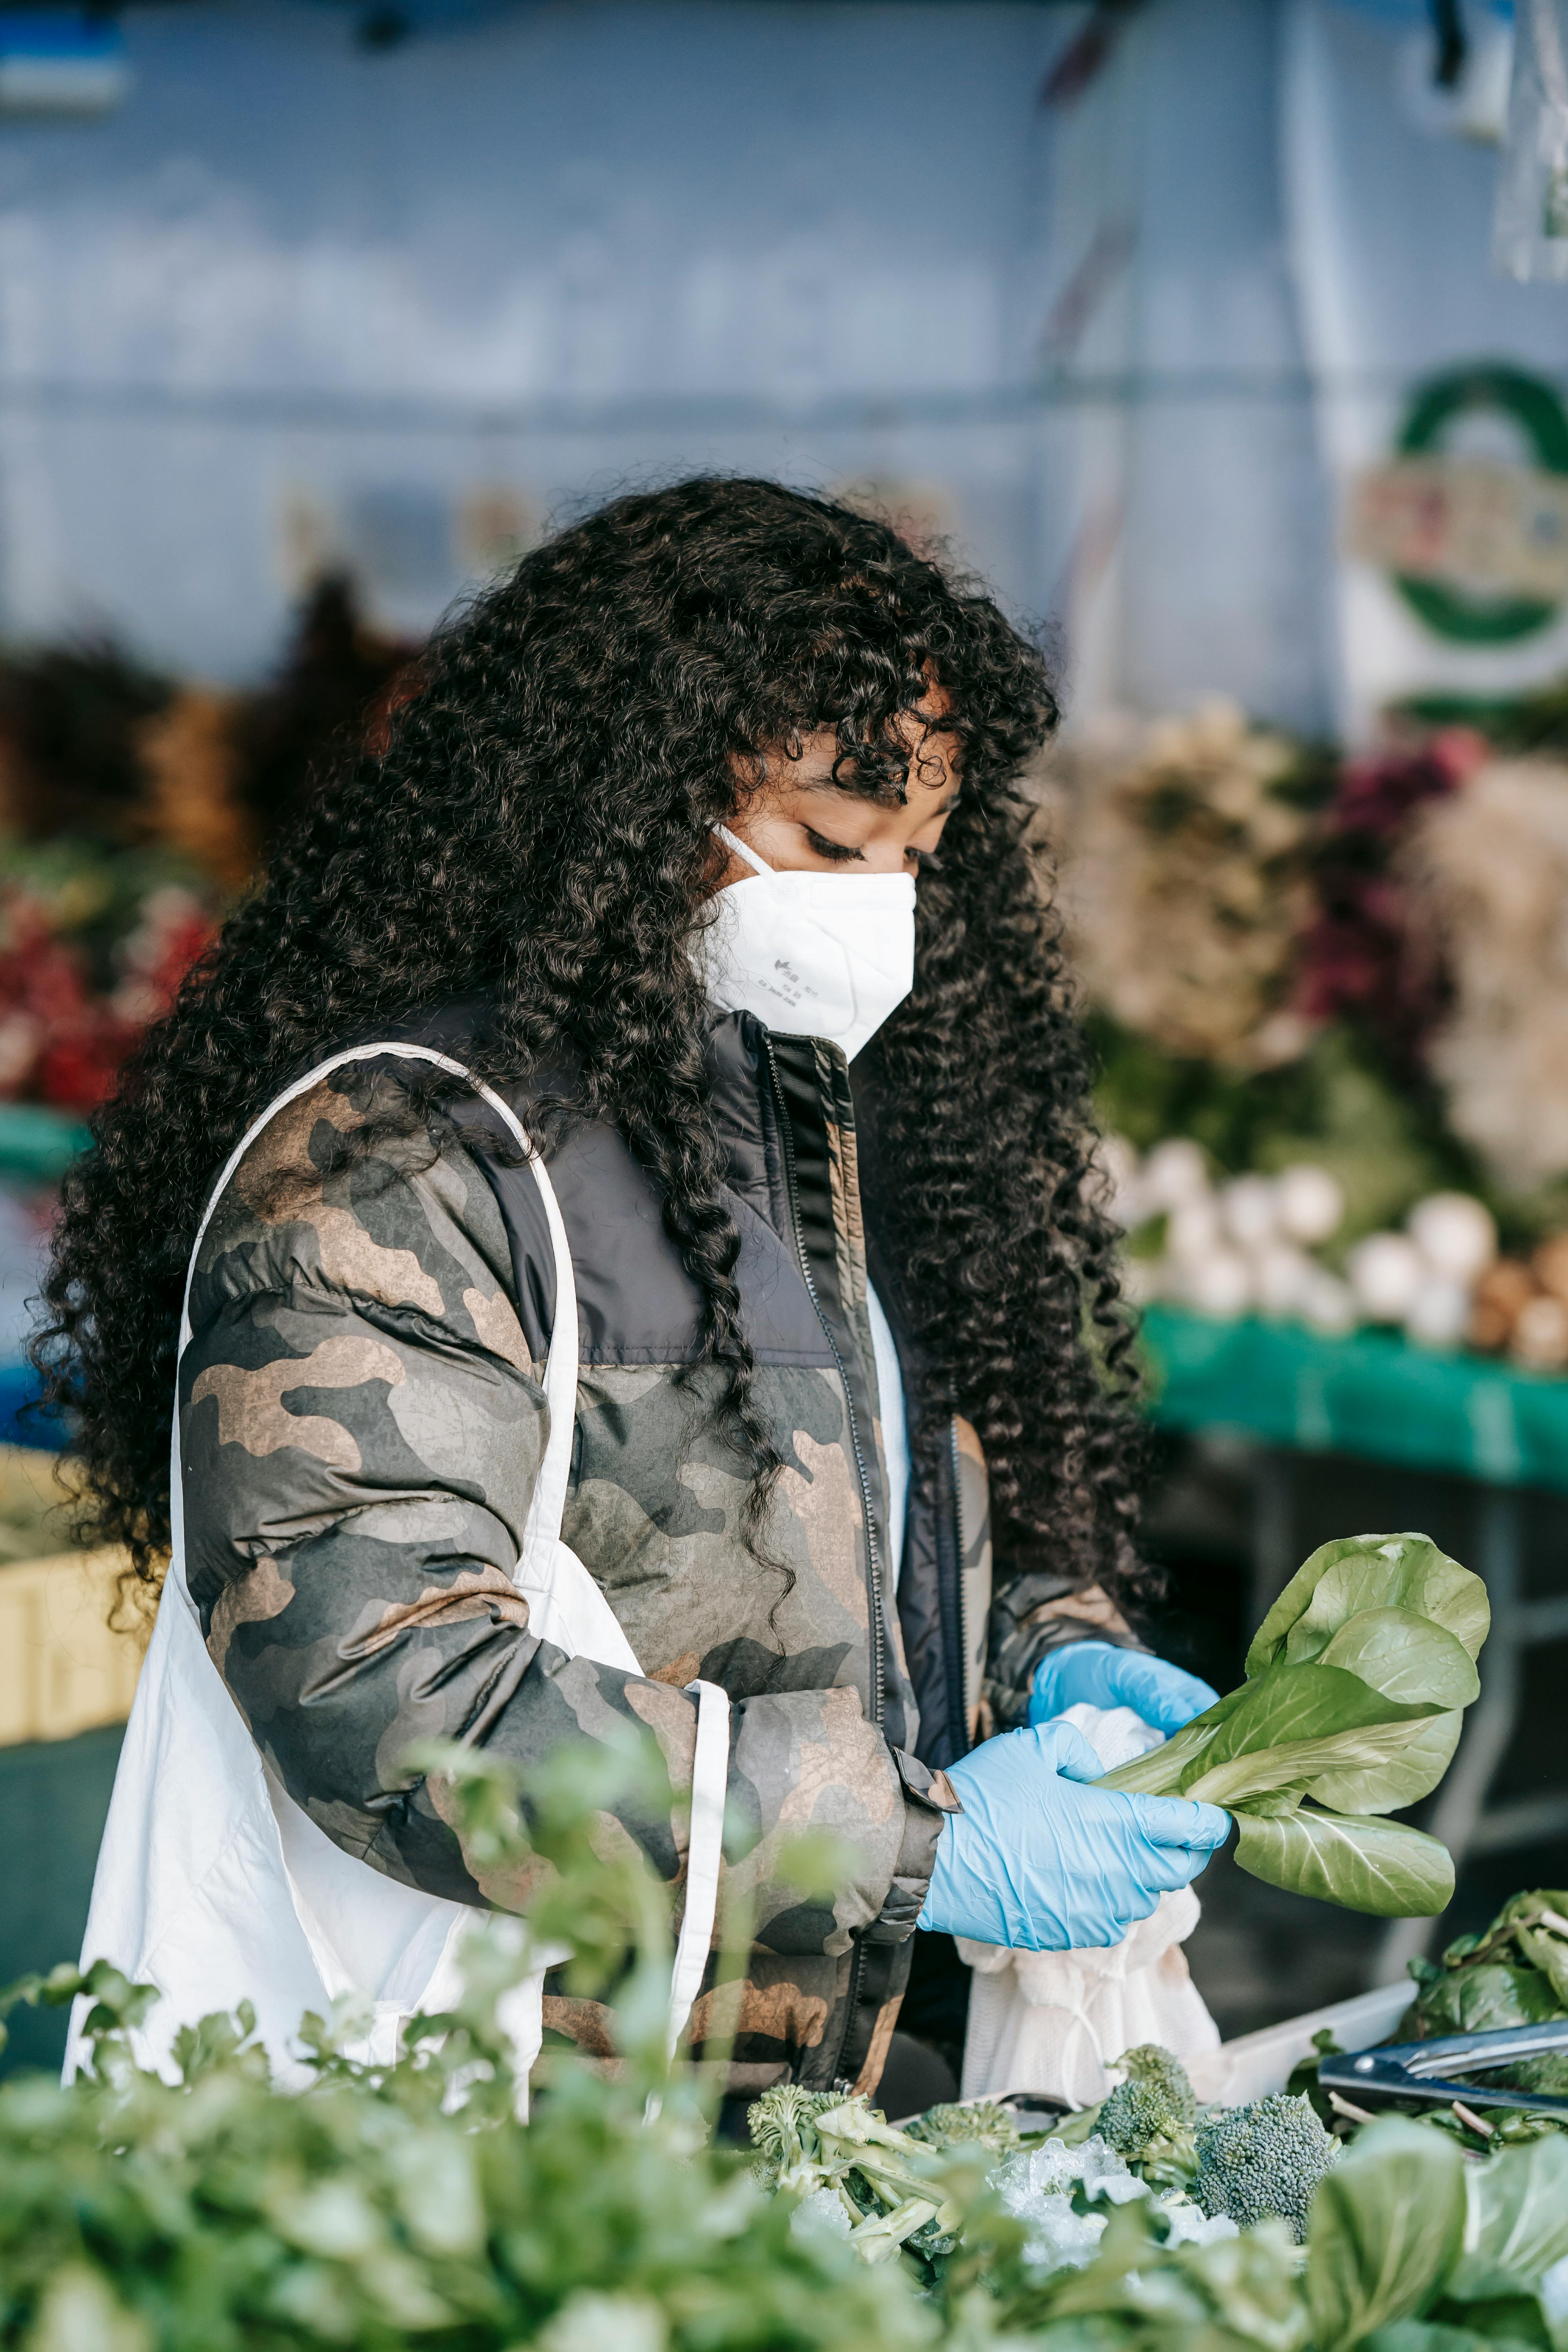 woman in protective mask buying spinach in market